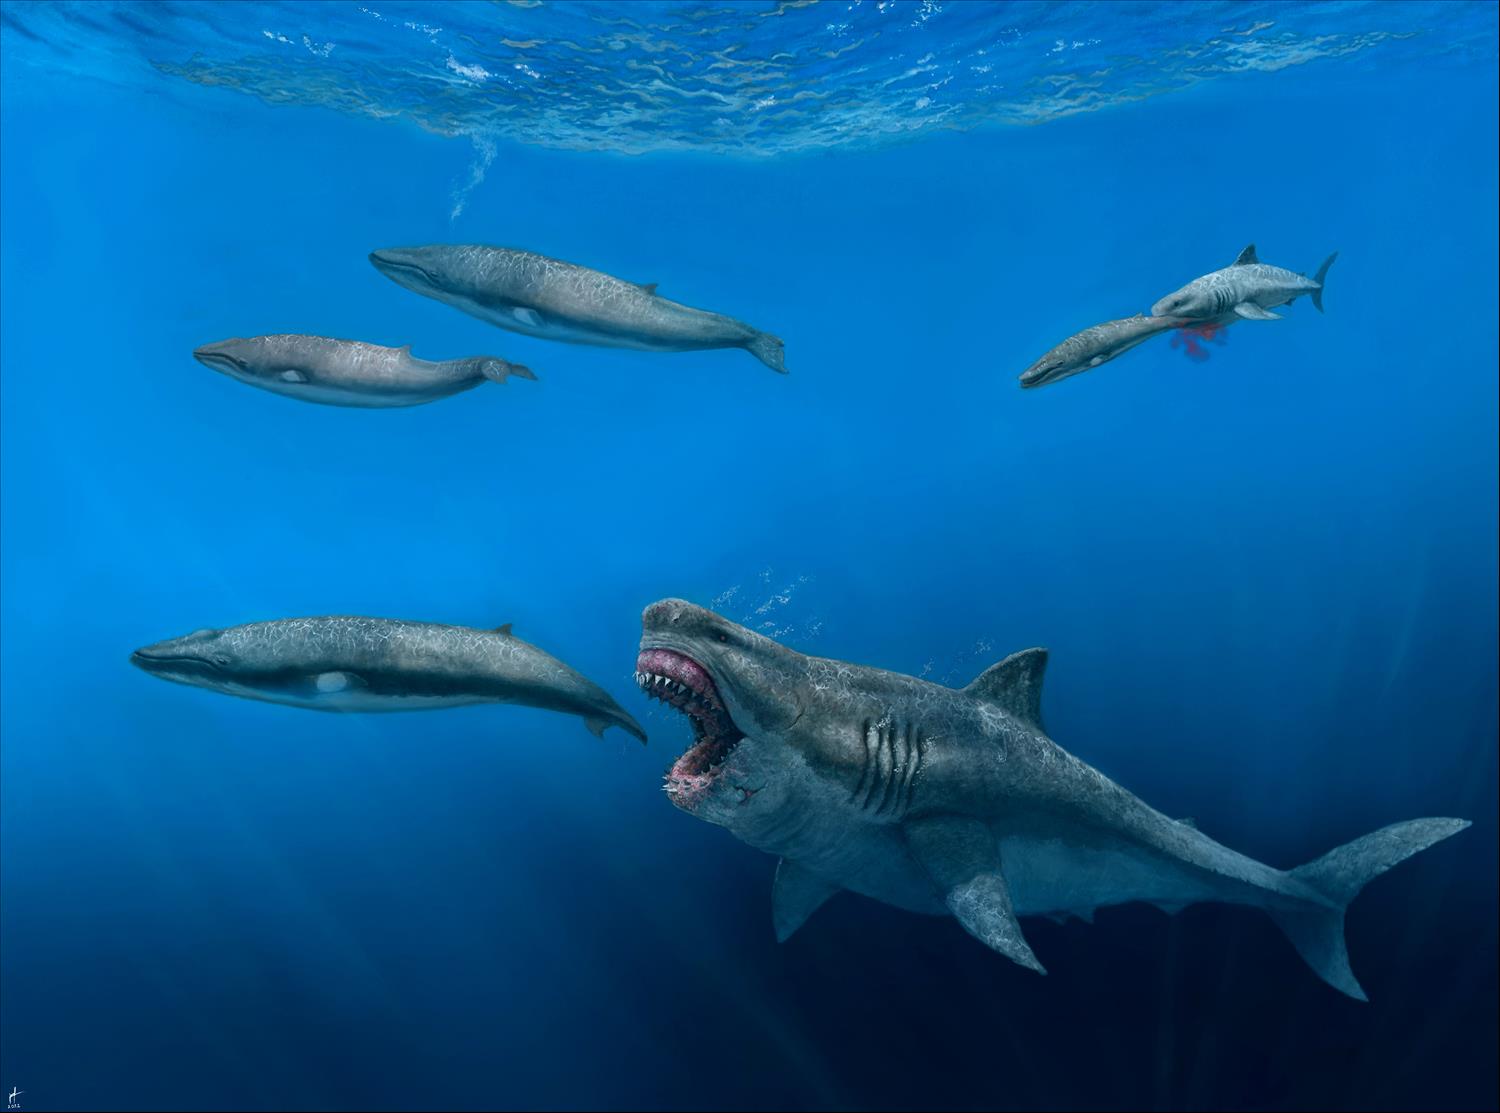 Ancient Megalodon Super-Predators Could Swallow A Great White Shark Whole, New Model Reveals